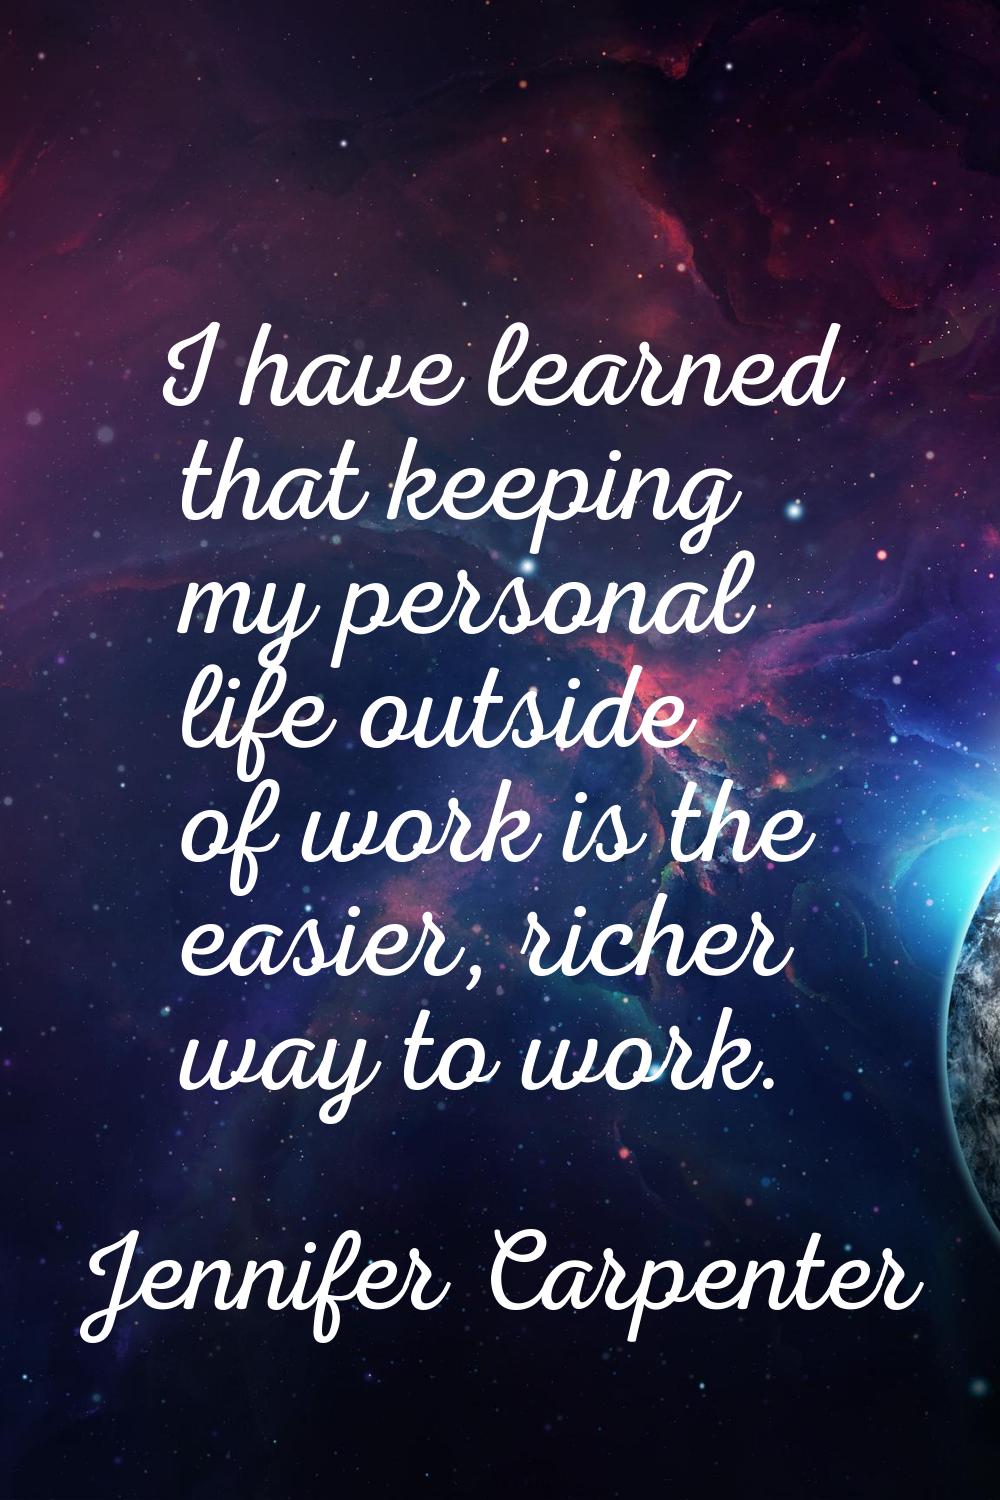 I have learned that keeping my personal life outside of work is the easier, richer way to work.